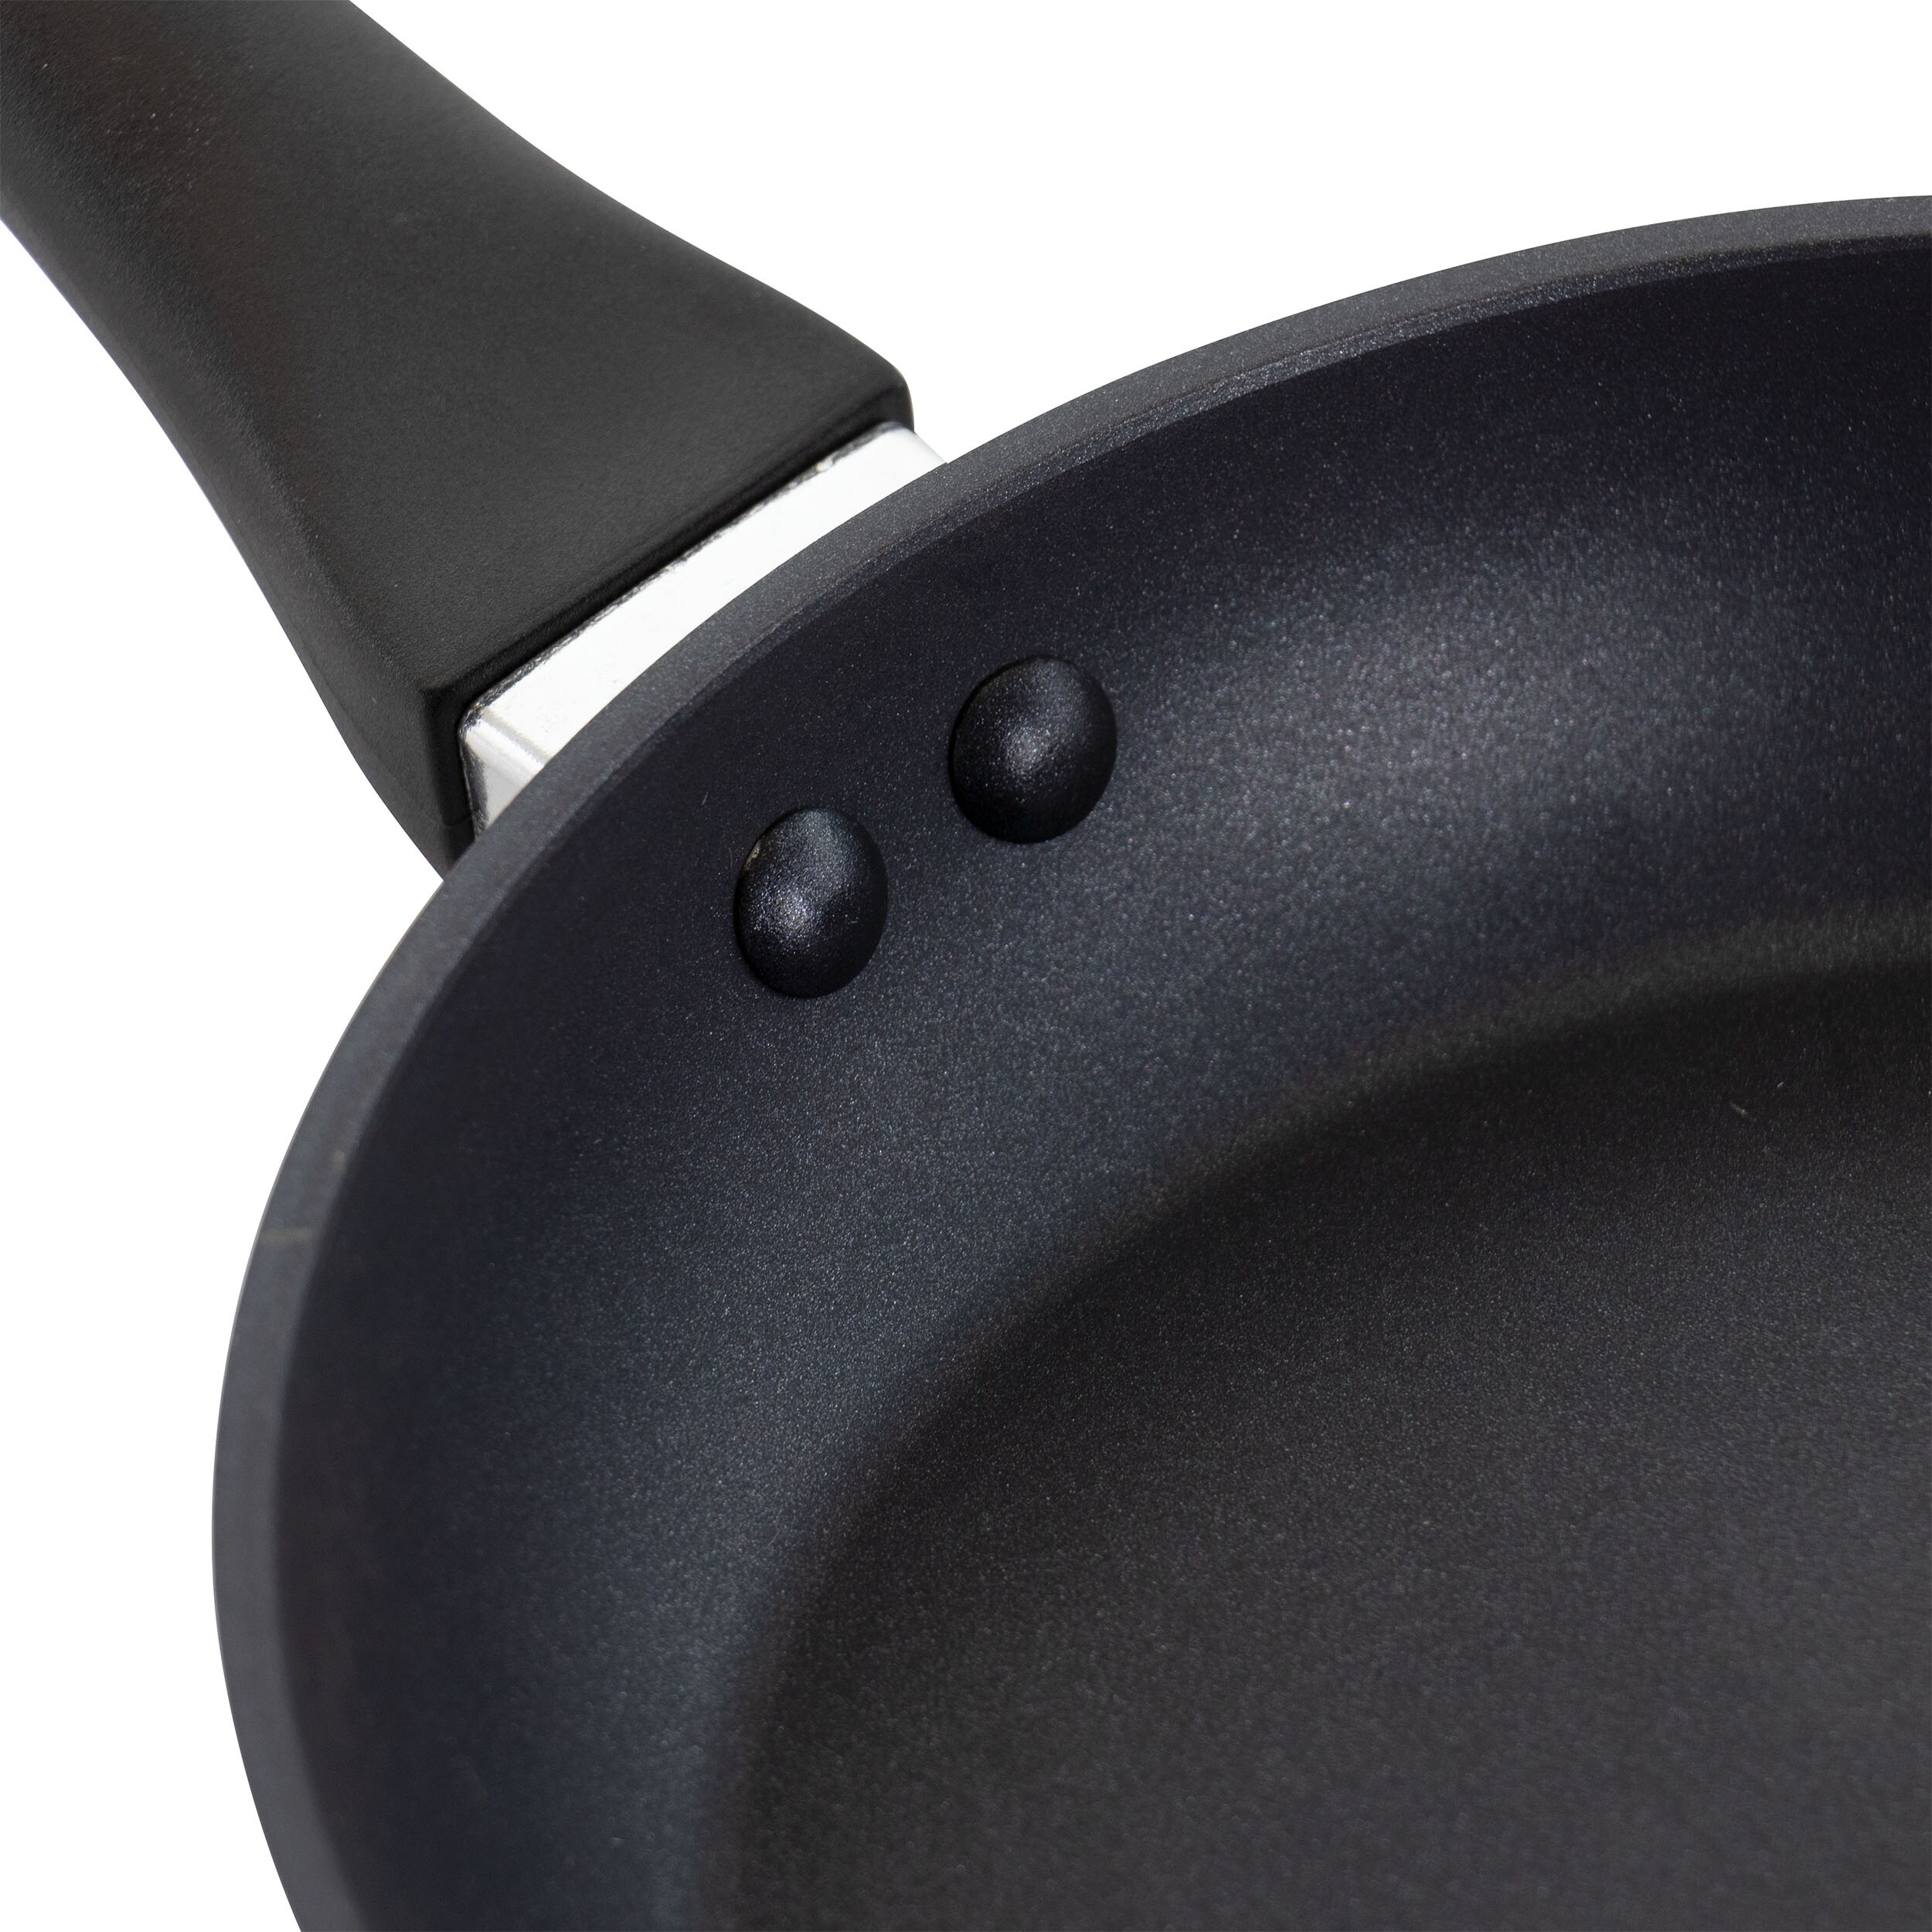 NEW 12 Oster Black Indoor Grill Electric Griddle Skillet Pan Nonstick Non  Stick